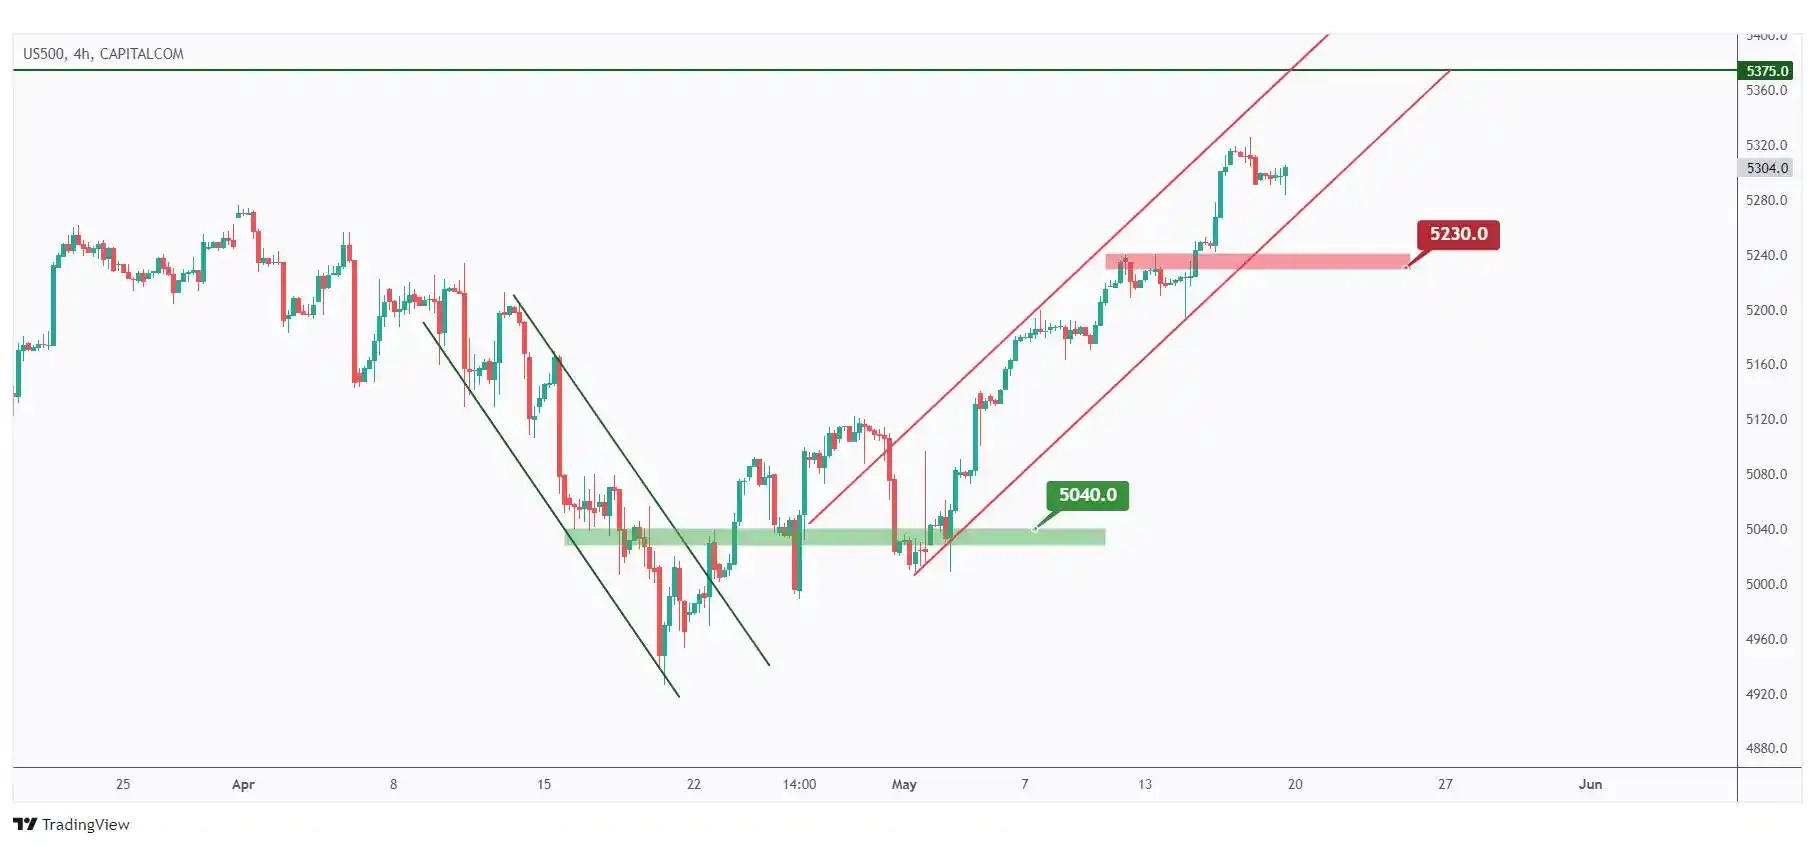 US500 4h chart overall bullish trading within the rising channel as long as the $5230 low holds.